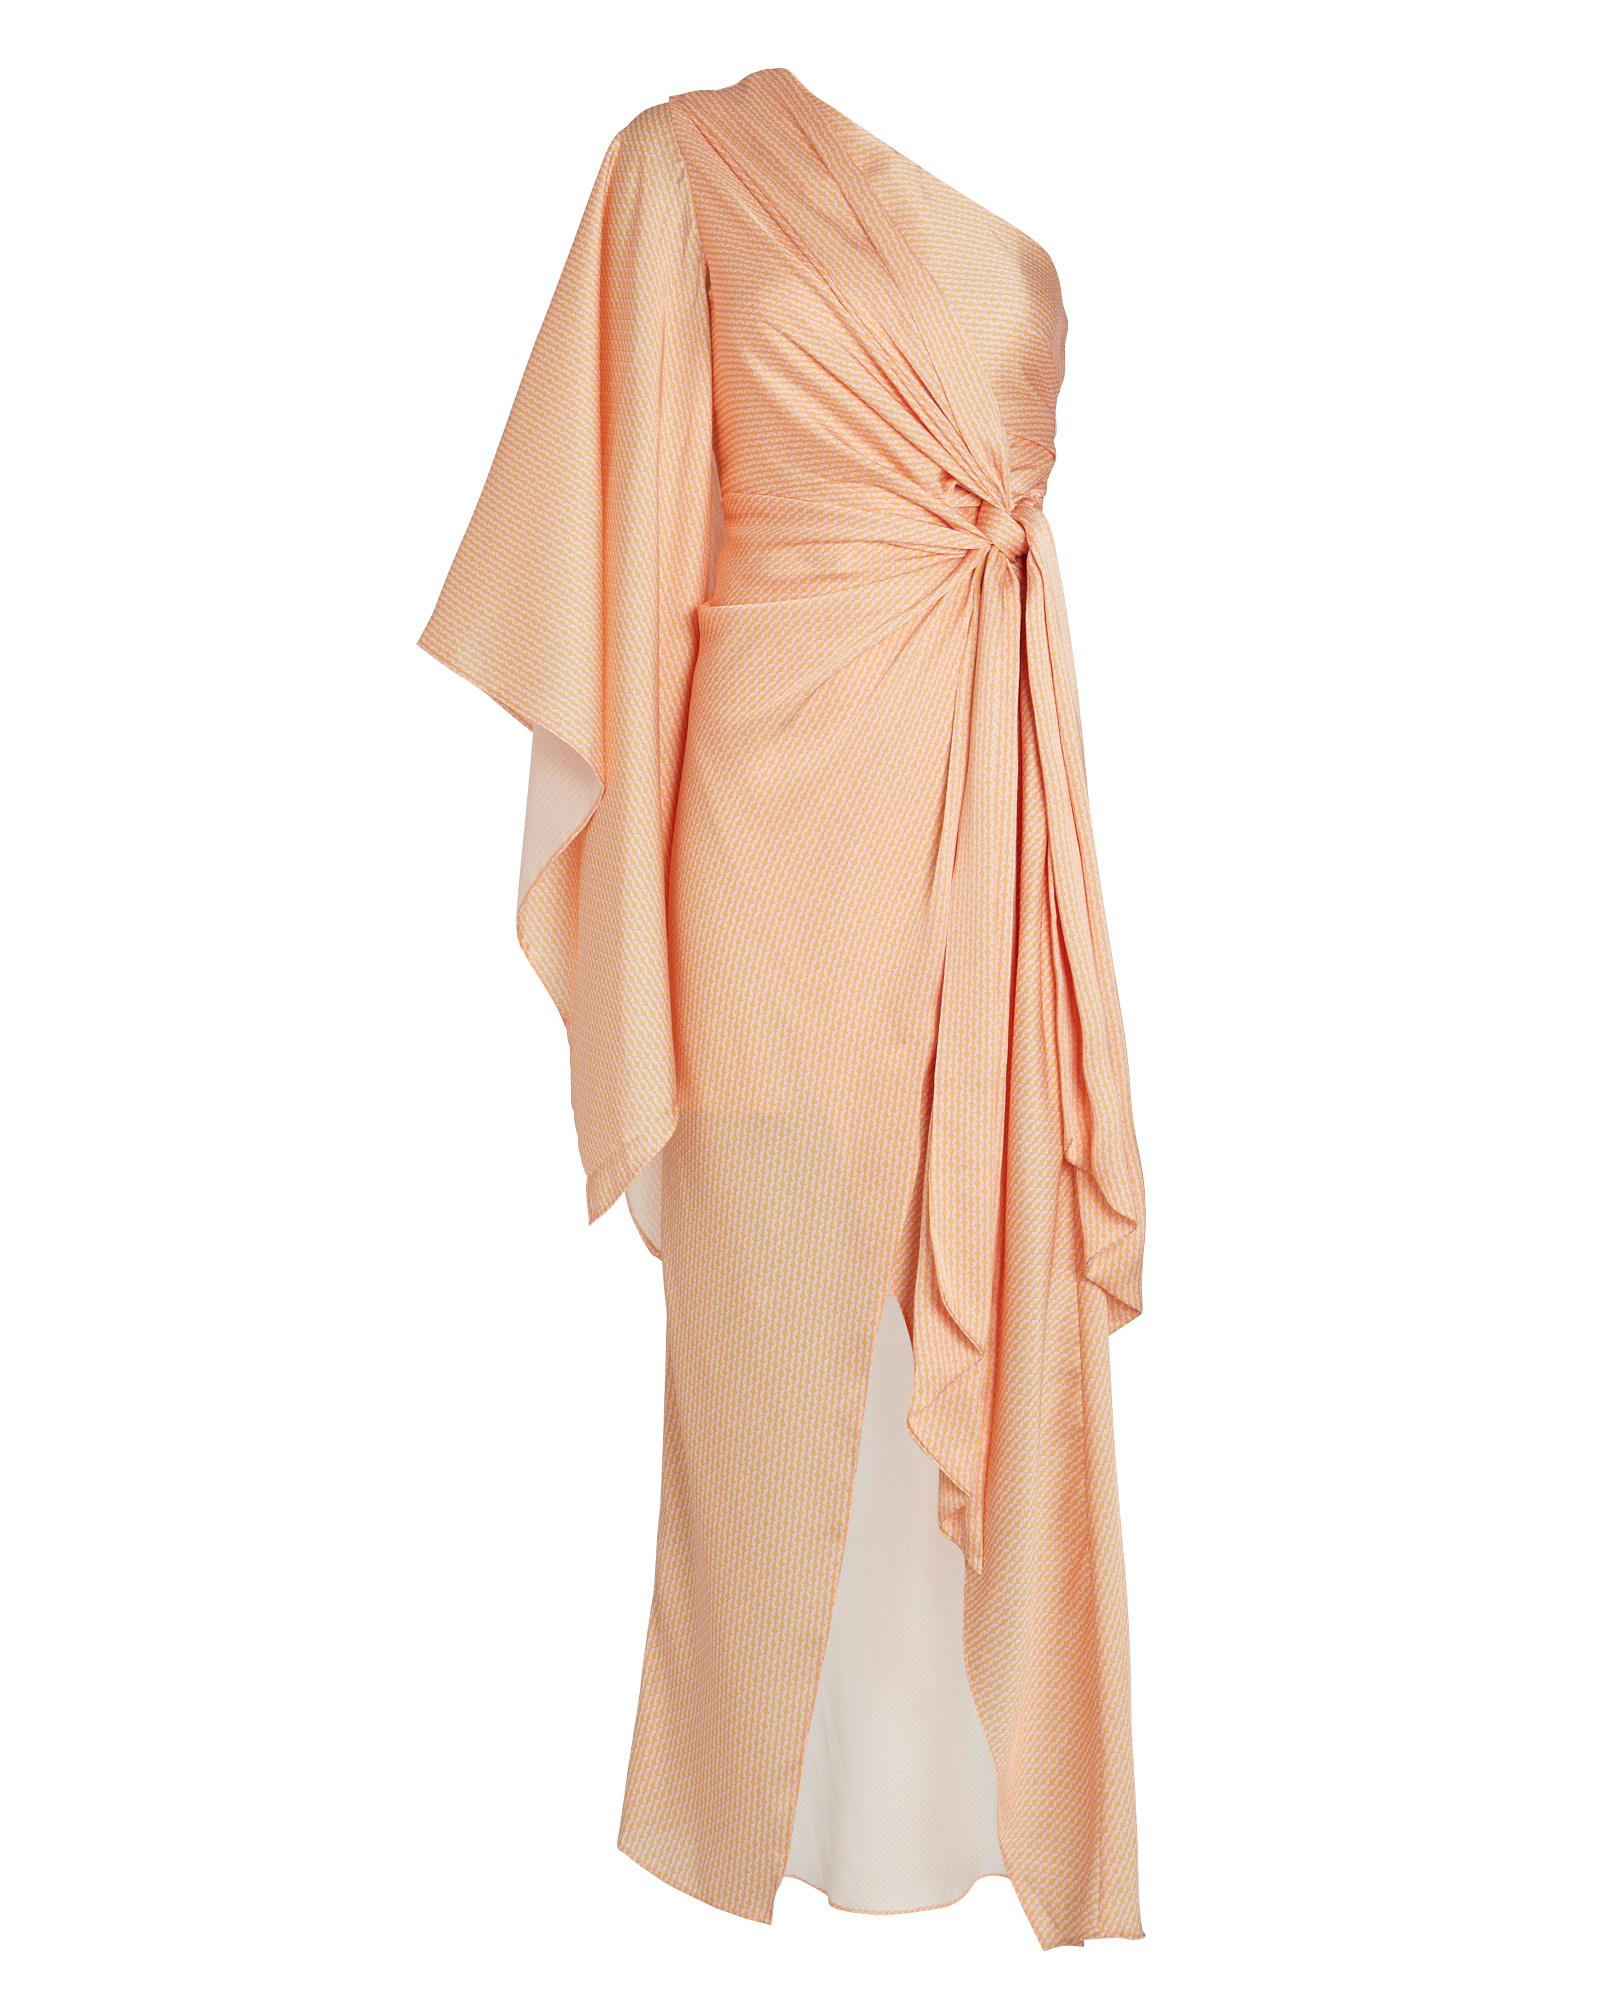 SIGNIFICANT OTHER Caspian Draped One-Shoulder Dress,060042715379